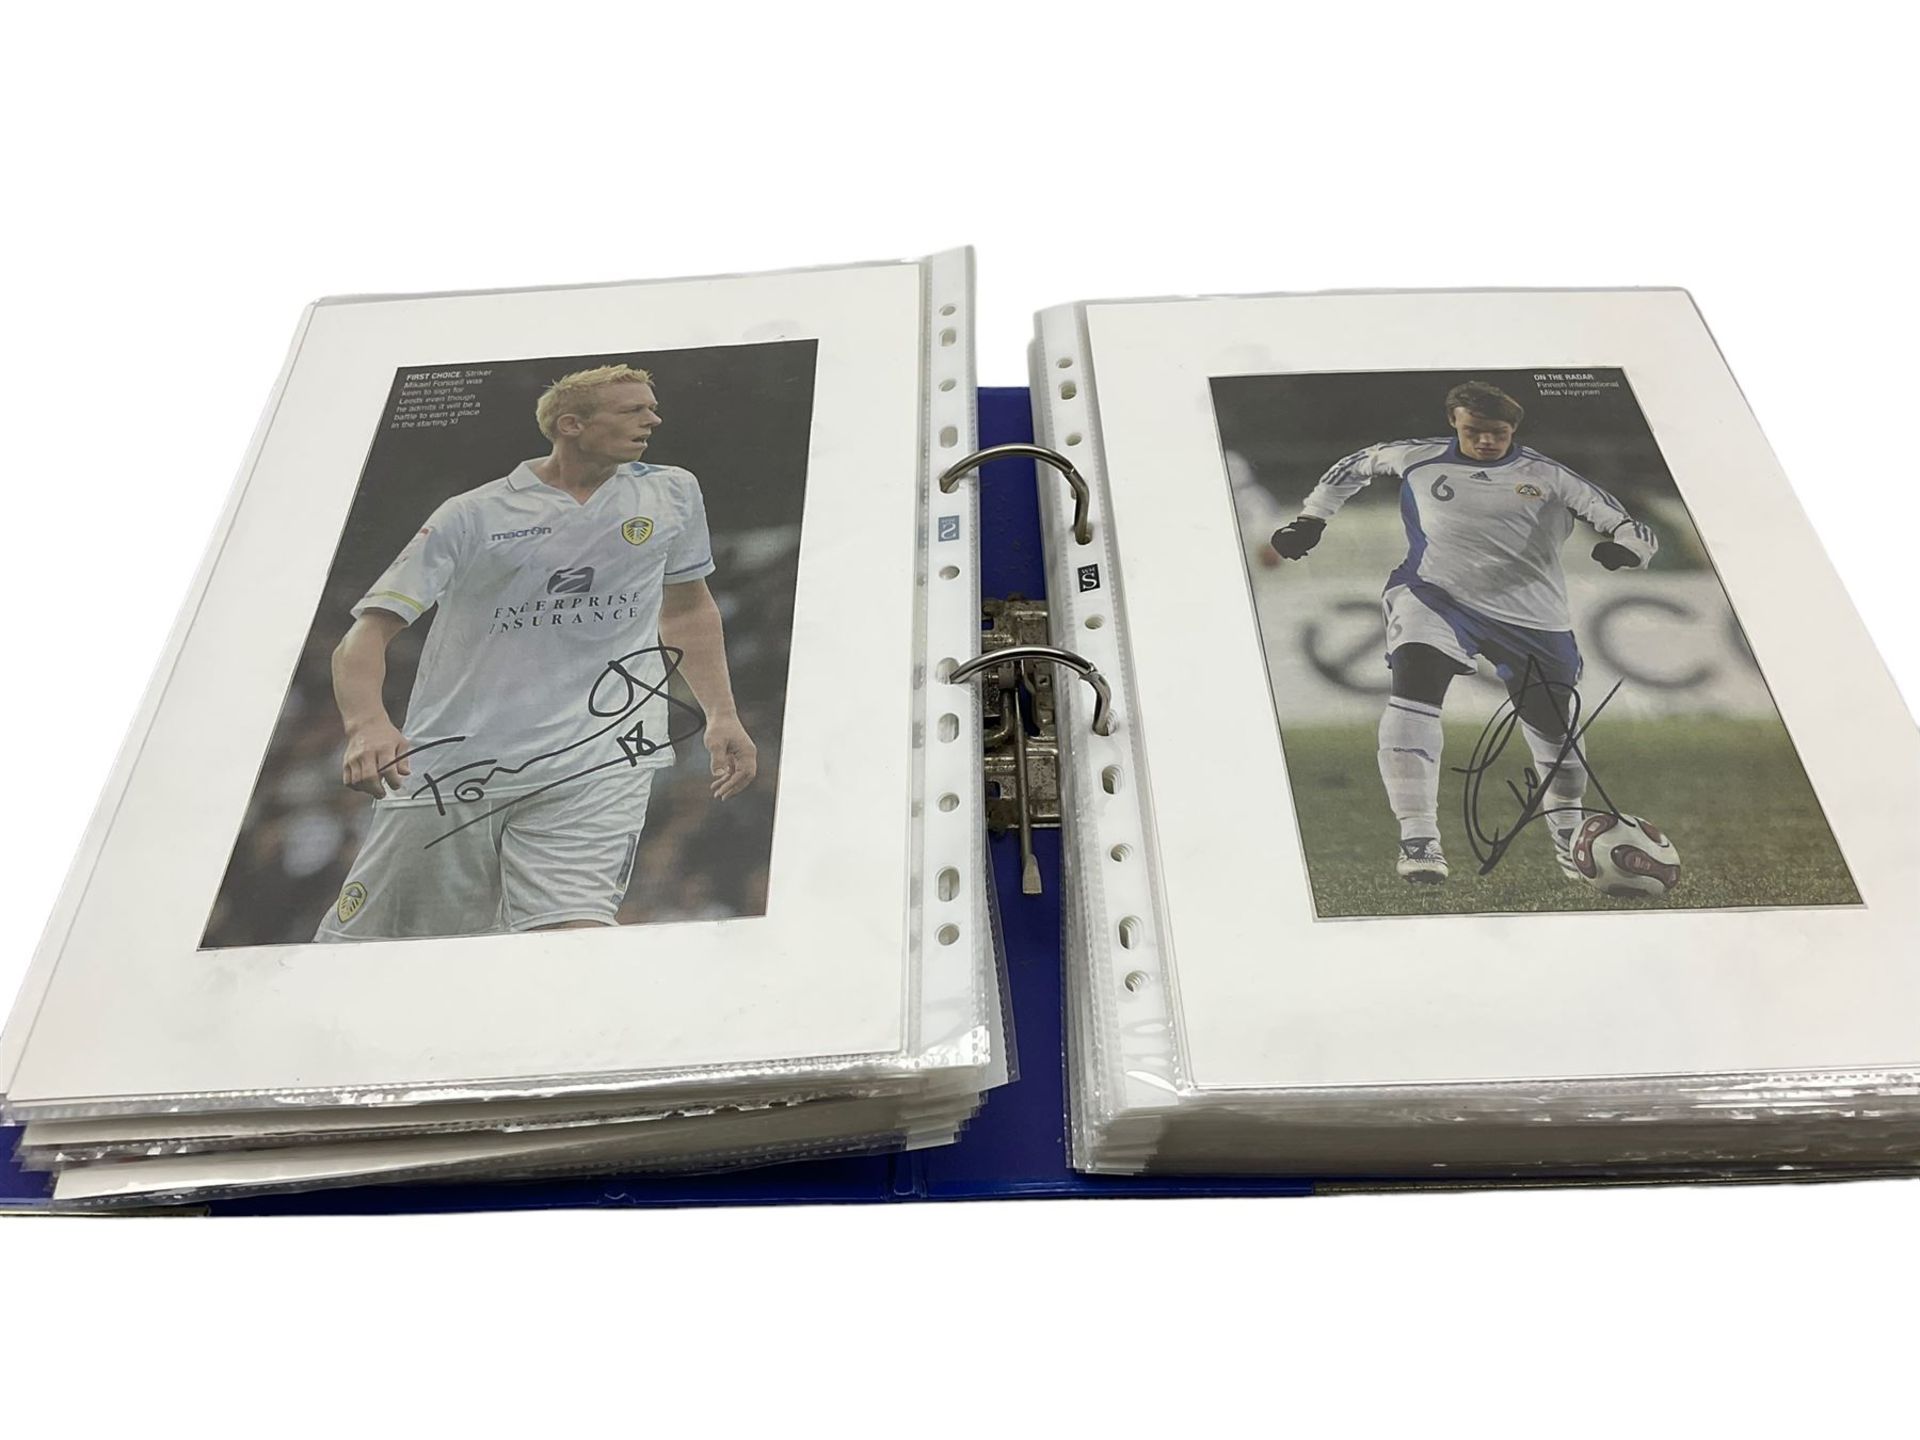 Leeds United football club - various autographs and signatures including Luciano Becchio - Image 6 of 10